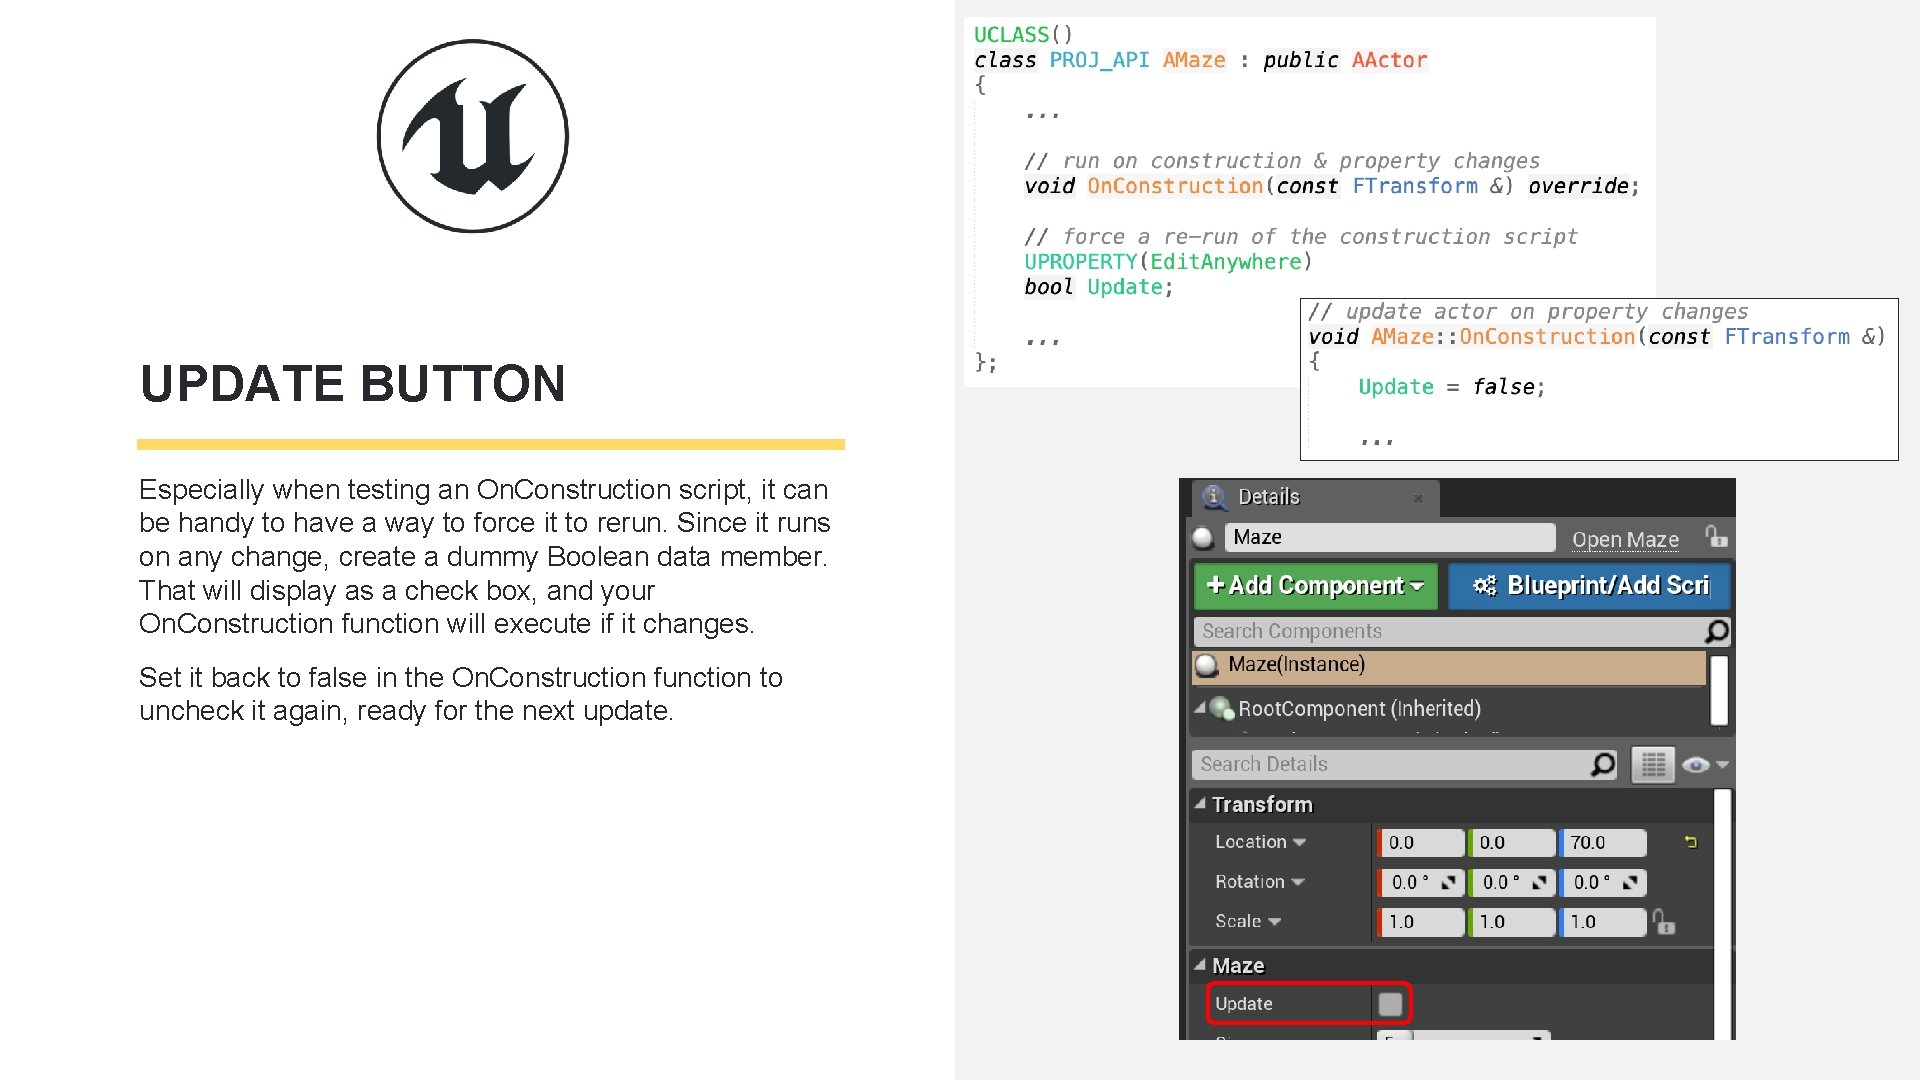 UPDATE BUTTON Especially when testing an On. Construction script, it can be handy to